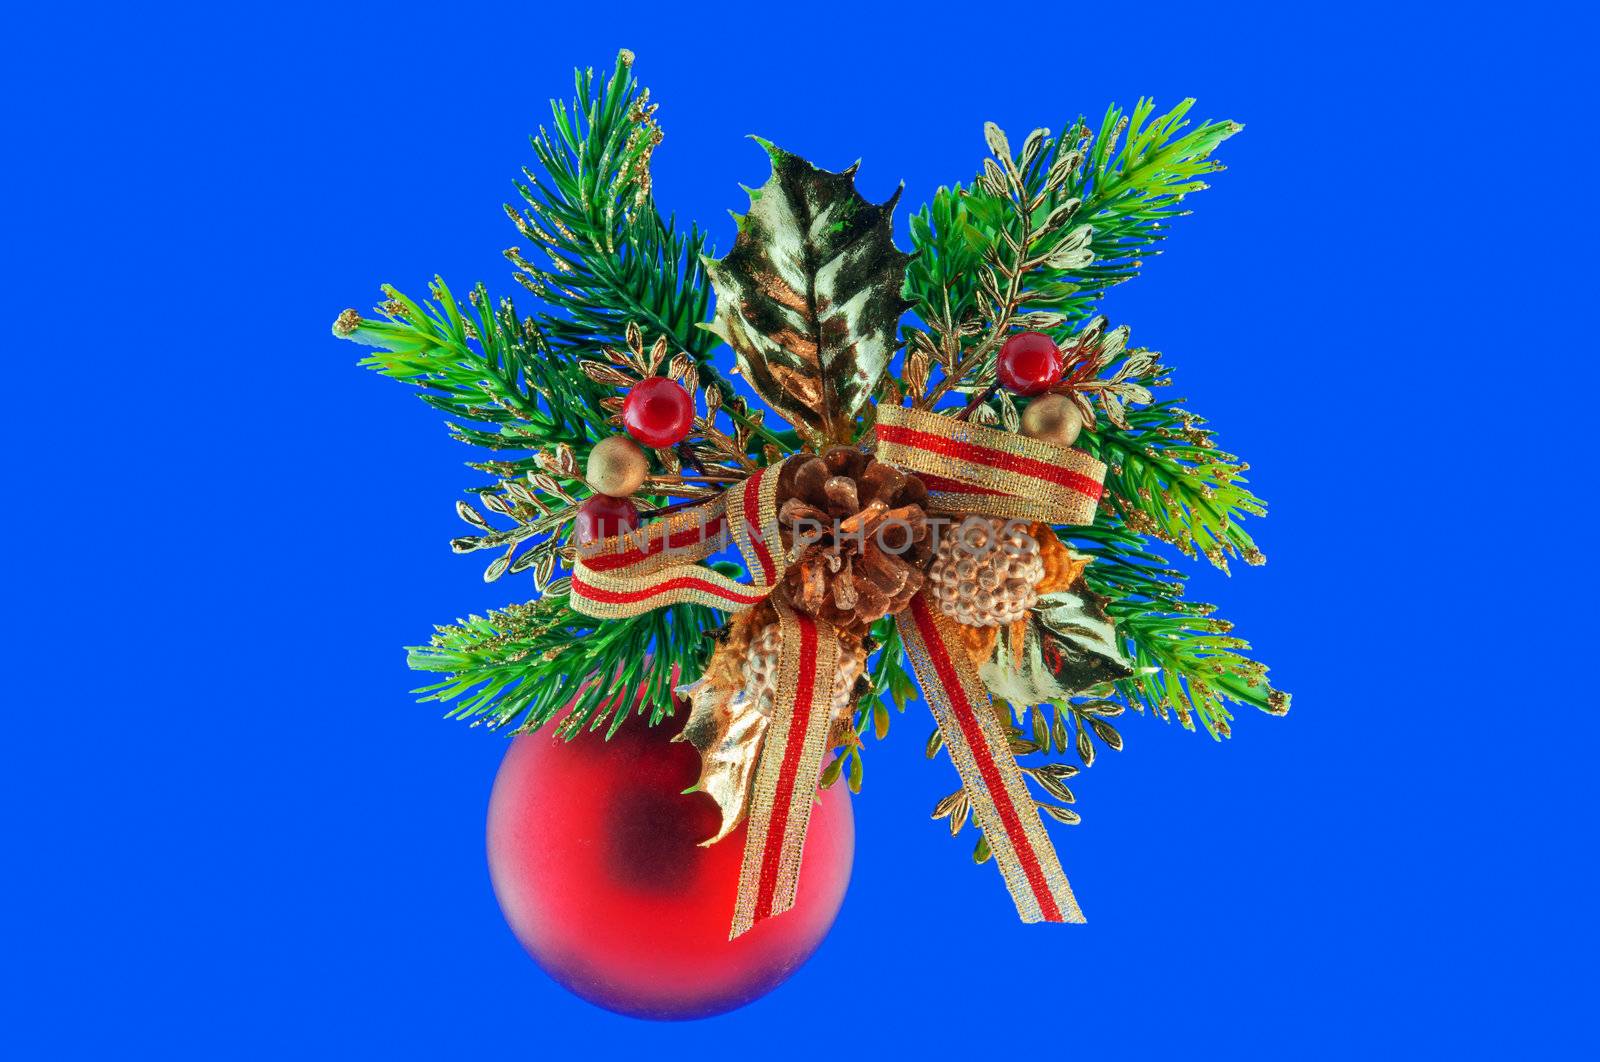 red ball, cone spruce, fir and sprigs to decorate for Christmas against a blue background